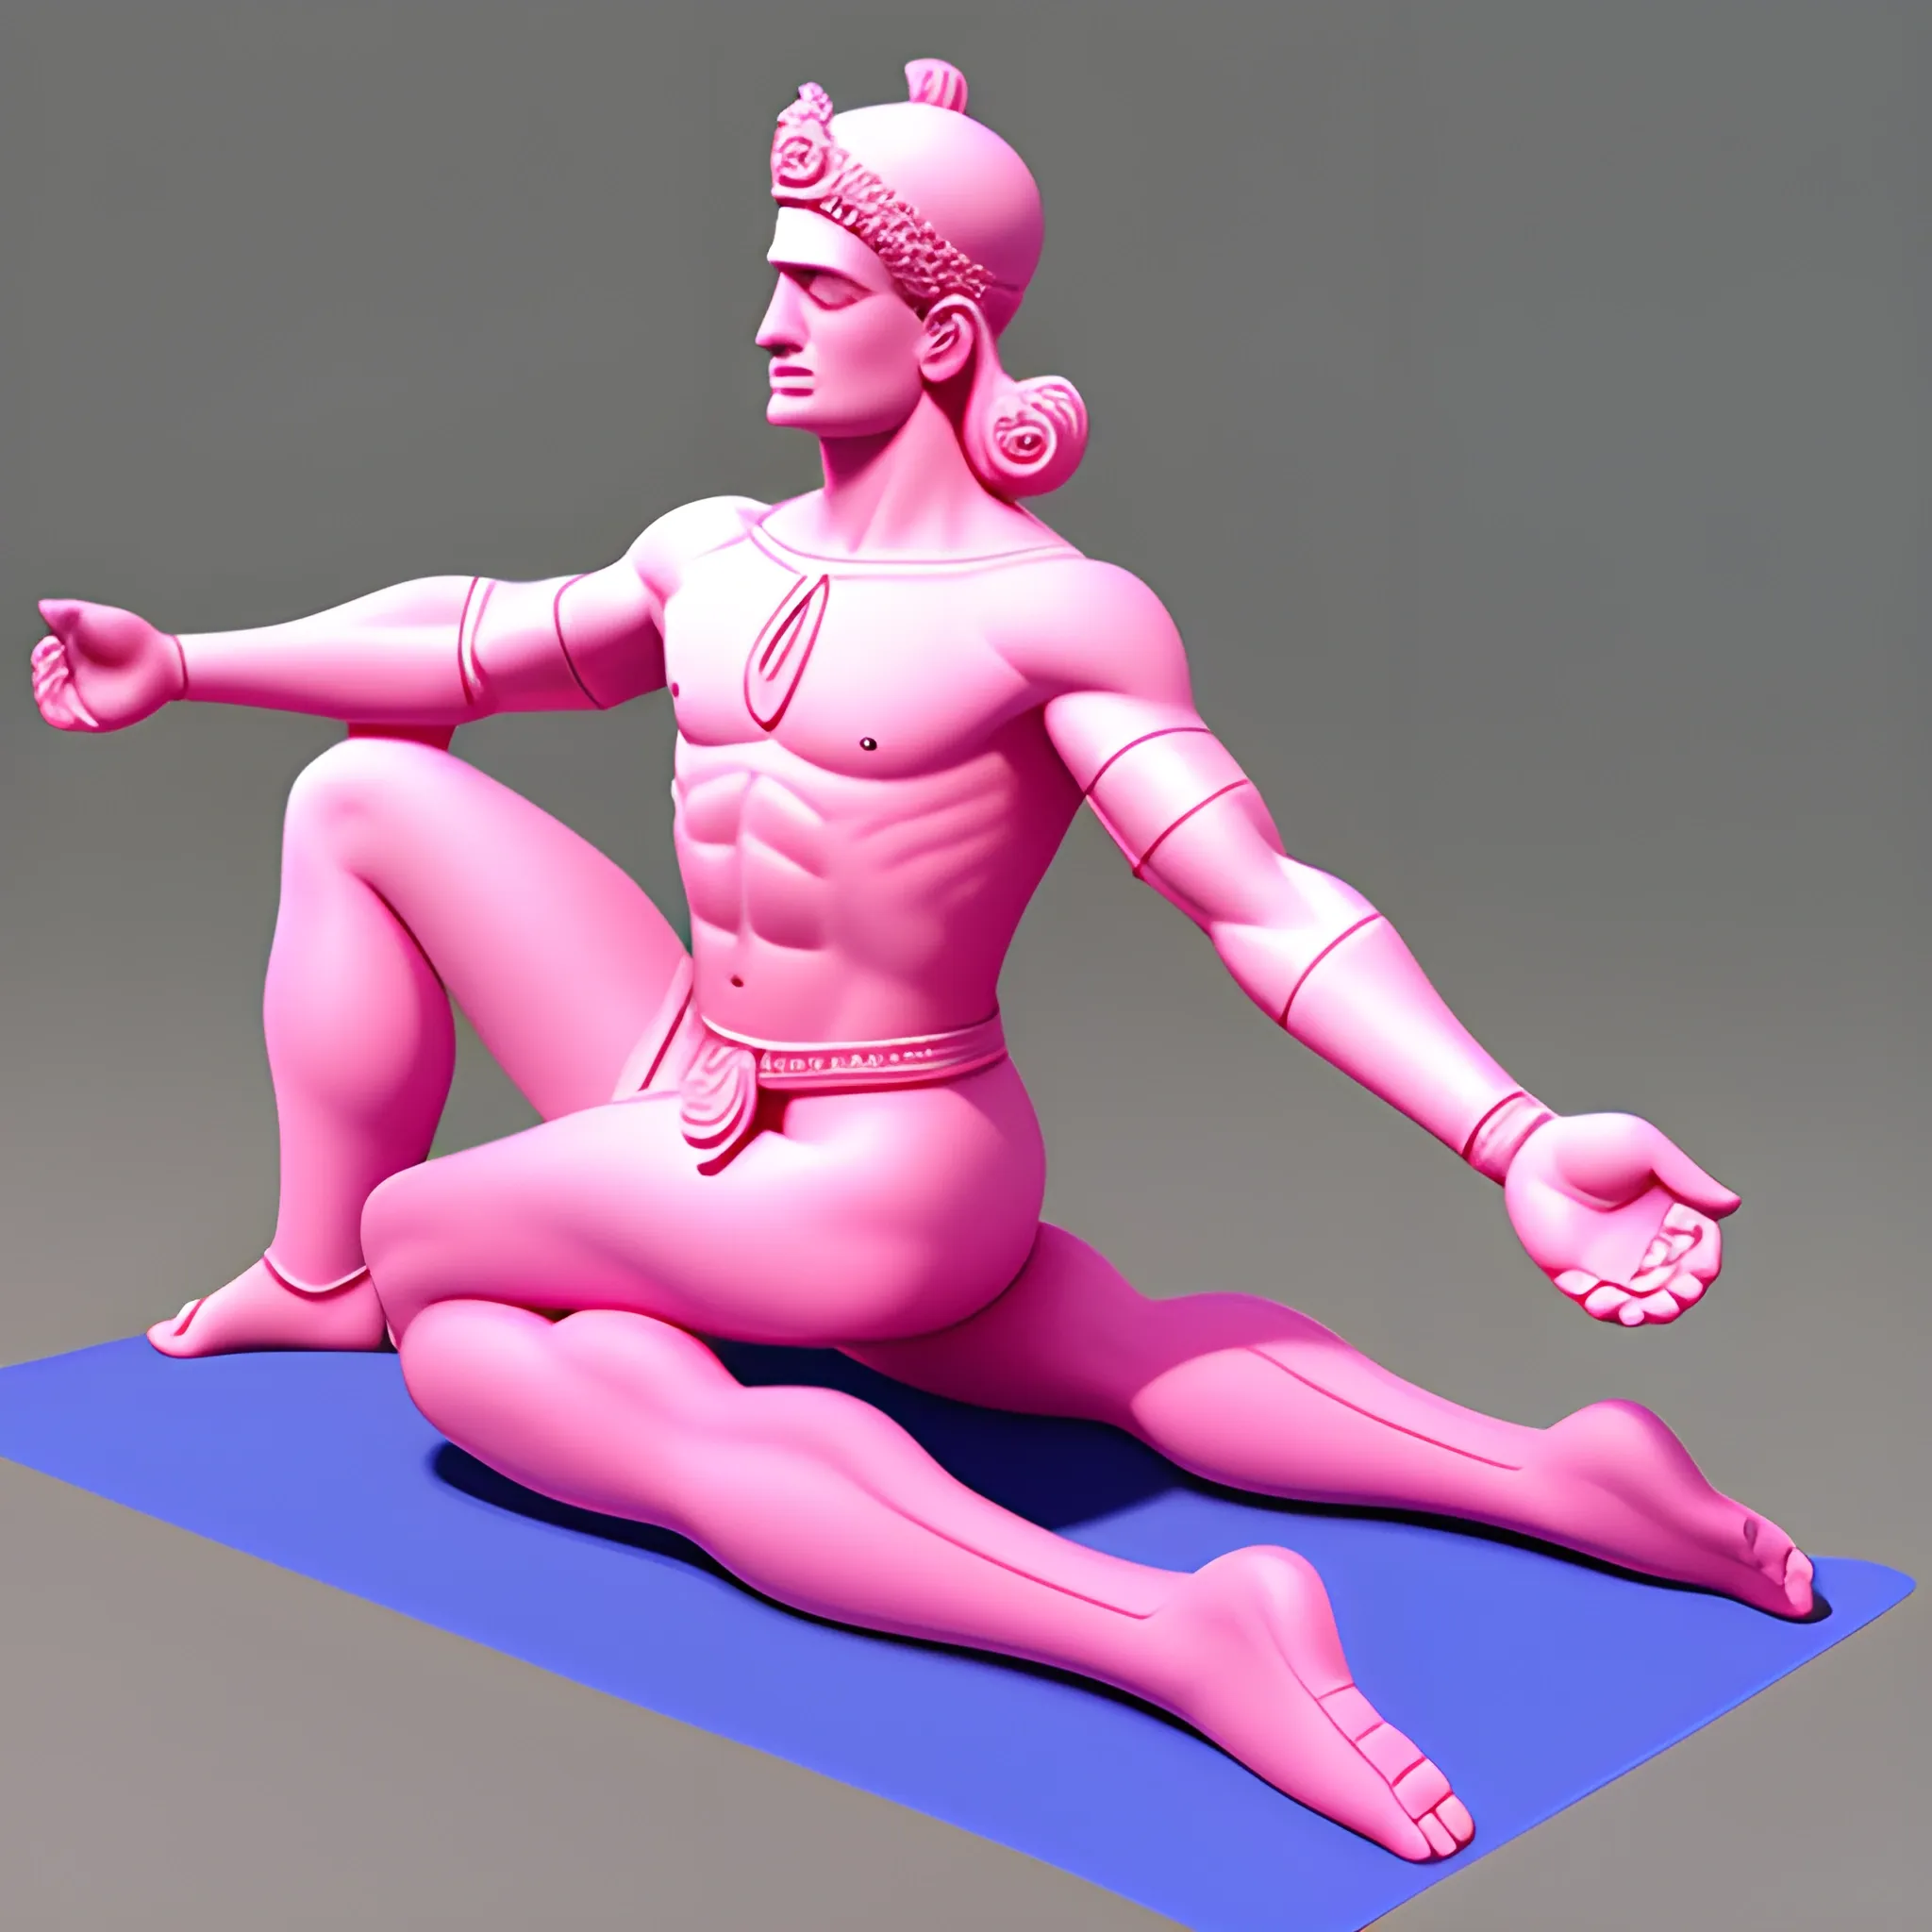 Can you draw a Hermes wearing pink tights on a yoga mat?, 3D